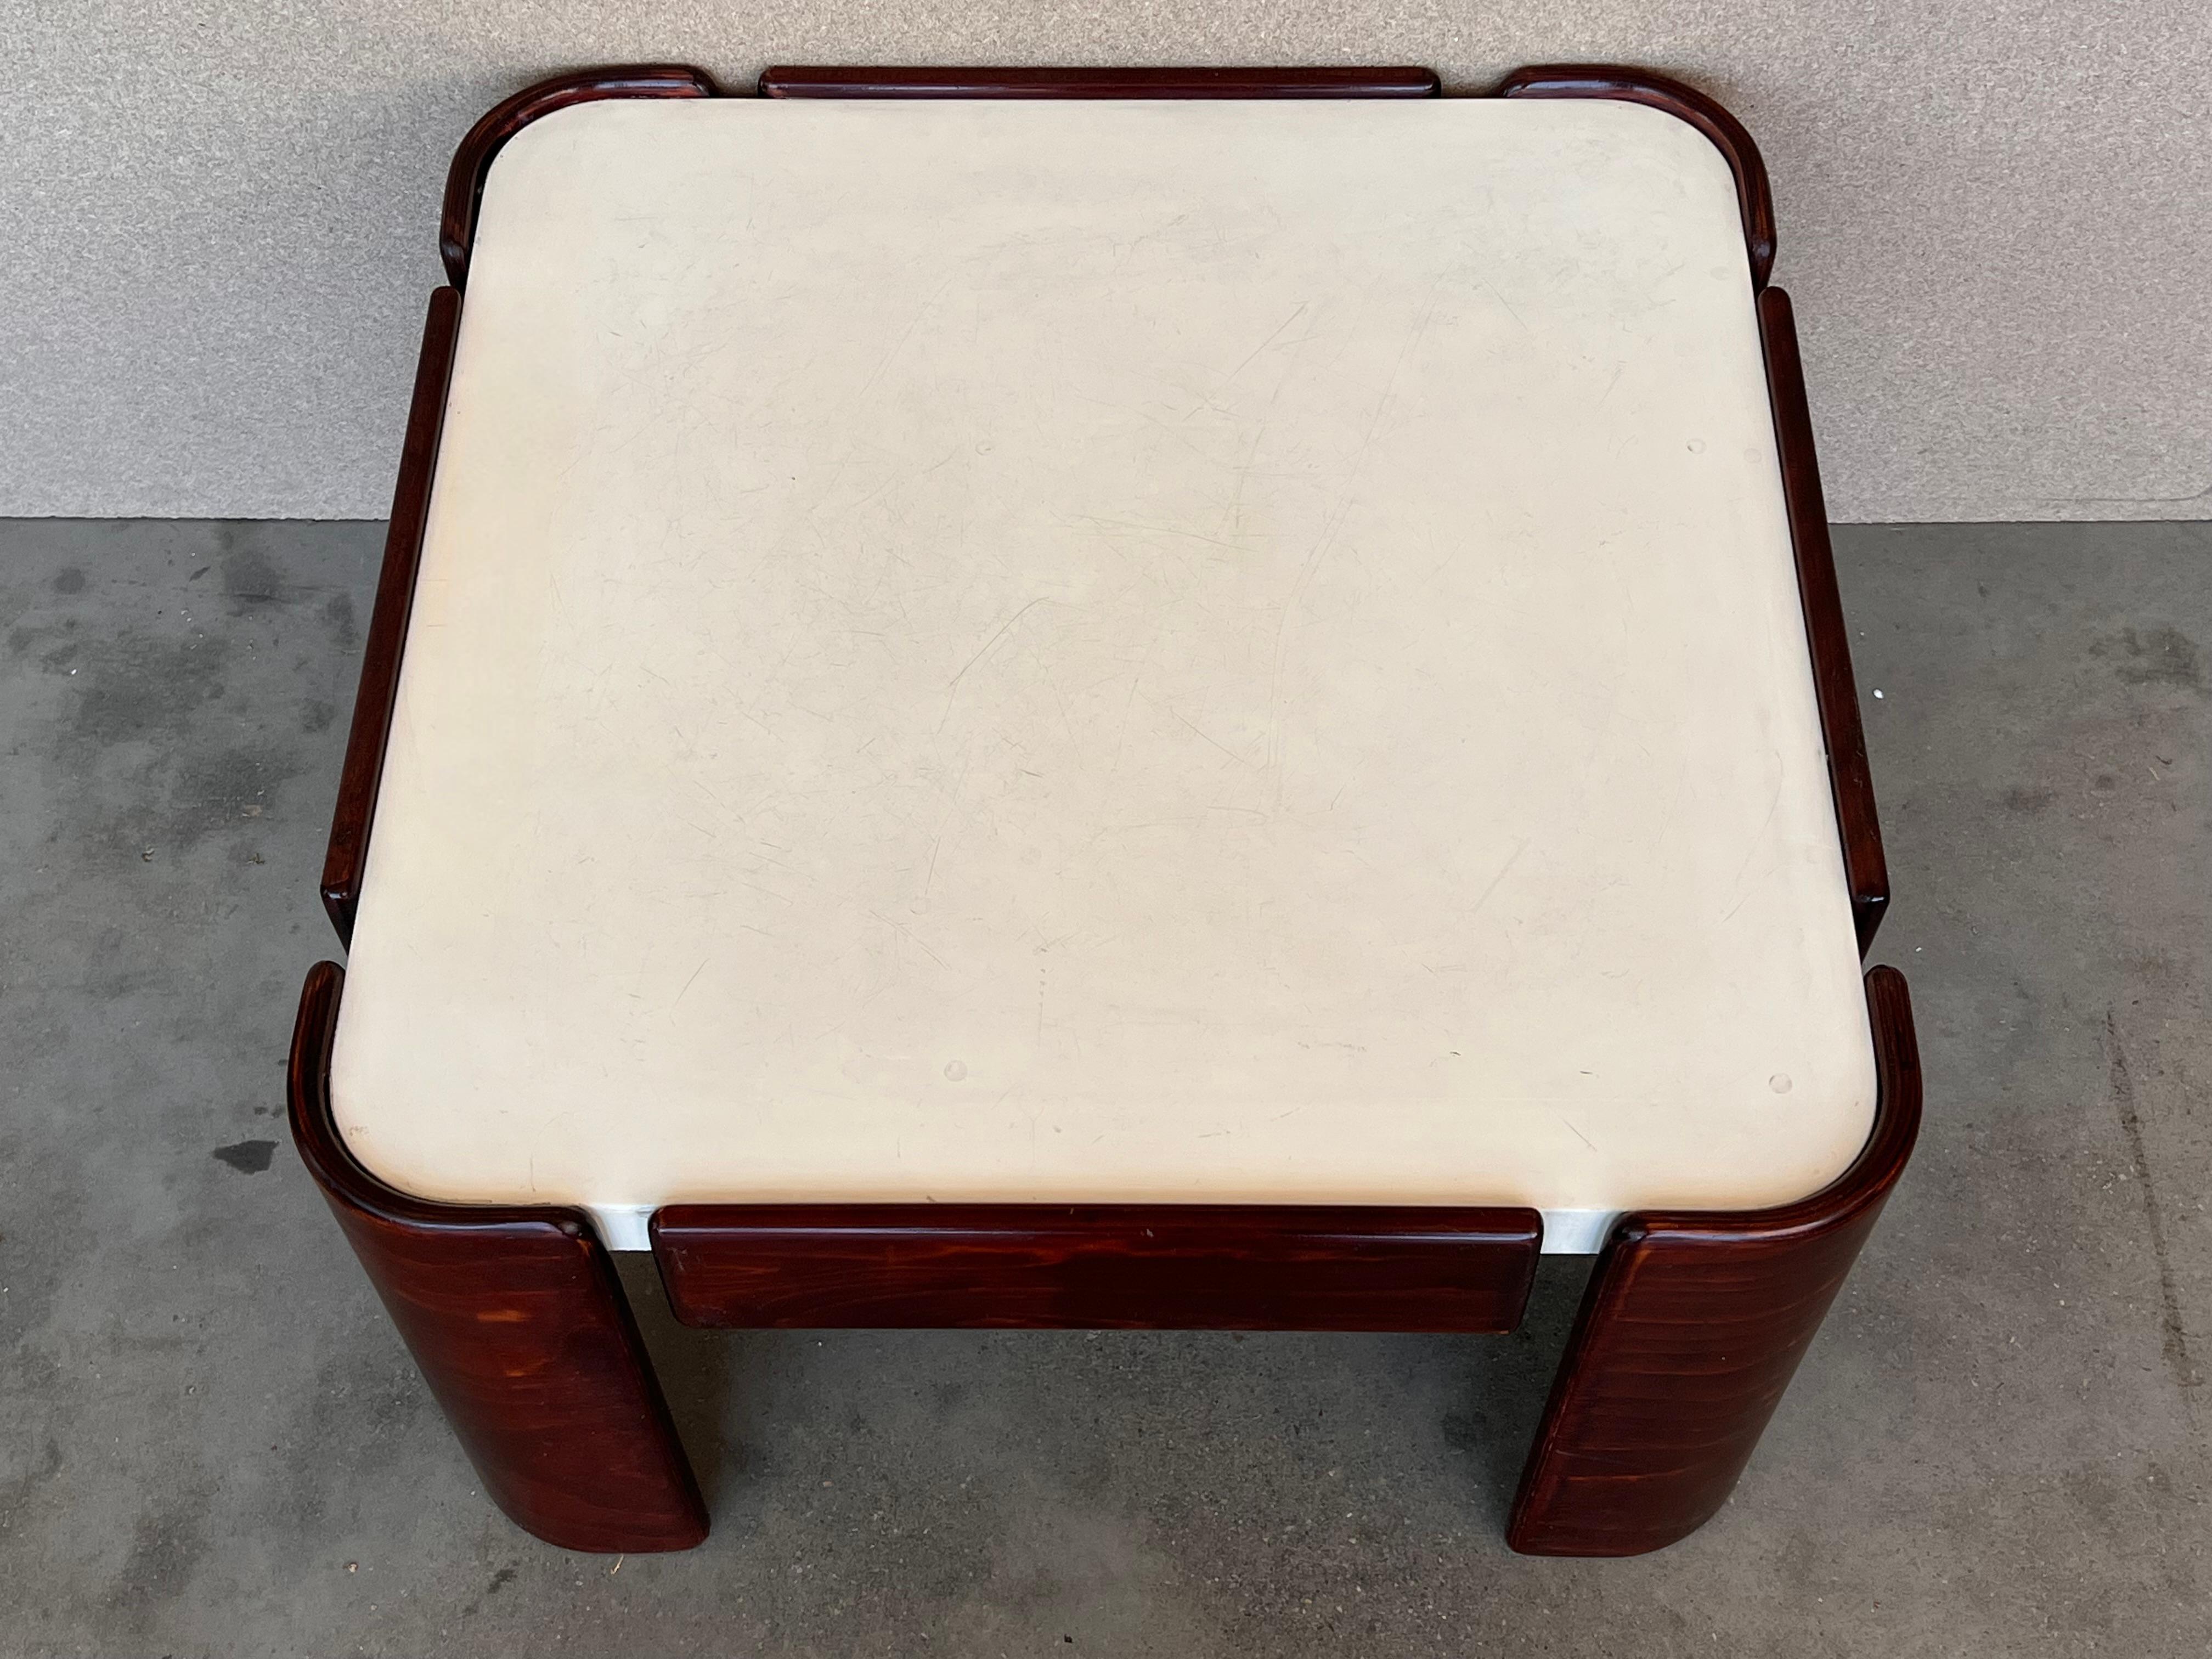 20th Century Mid-Century Modern Square Table with Curved Legs and White Top For Sale